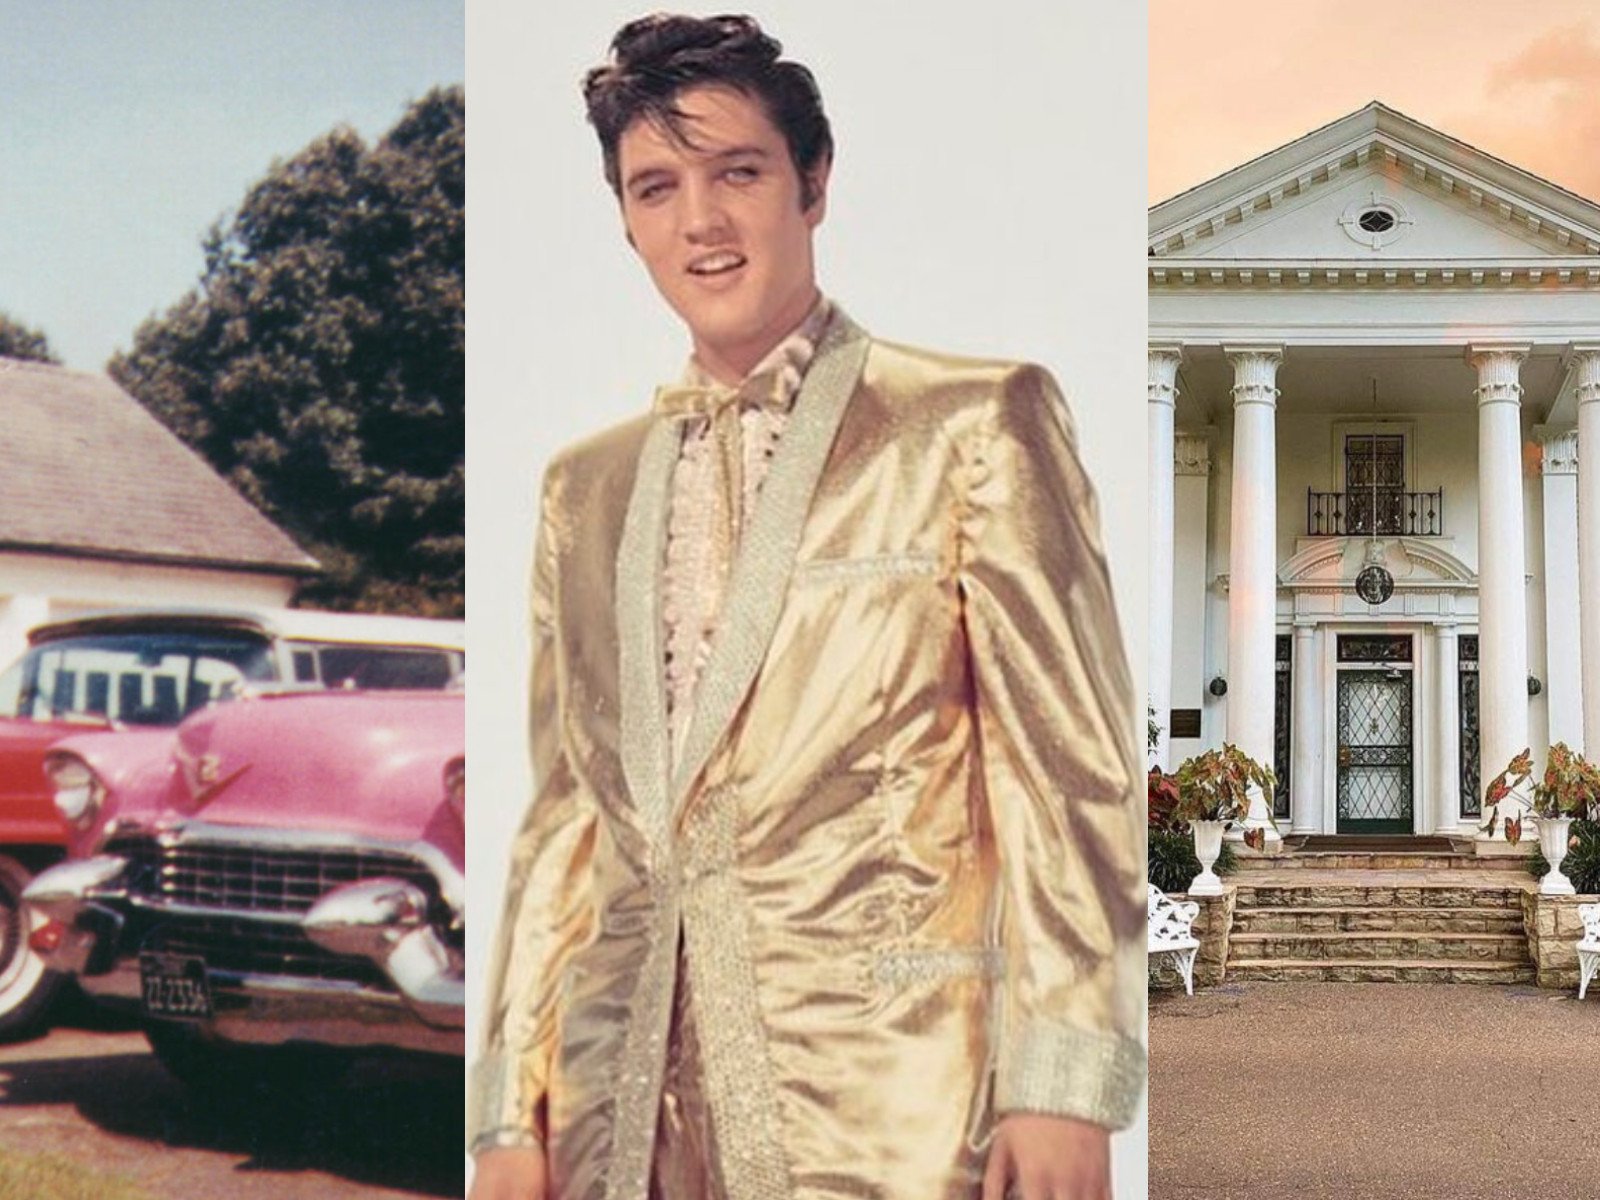 With Elvis Presley’s fame came fortune – and he spent like there was no tomorrow. Photos: @ElvisPresley/Twitter; @elvis, @visitgraceland/Instagram